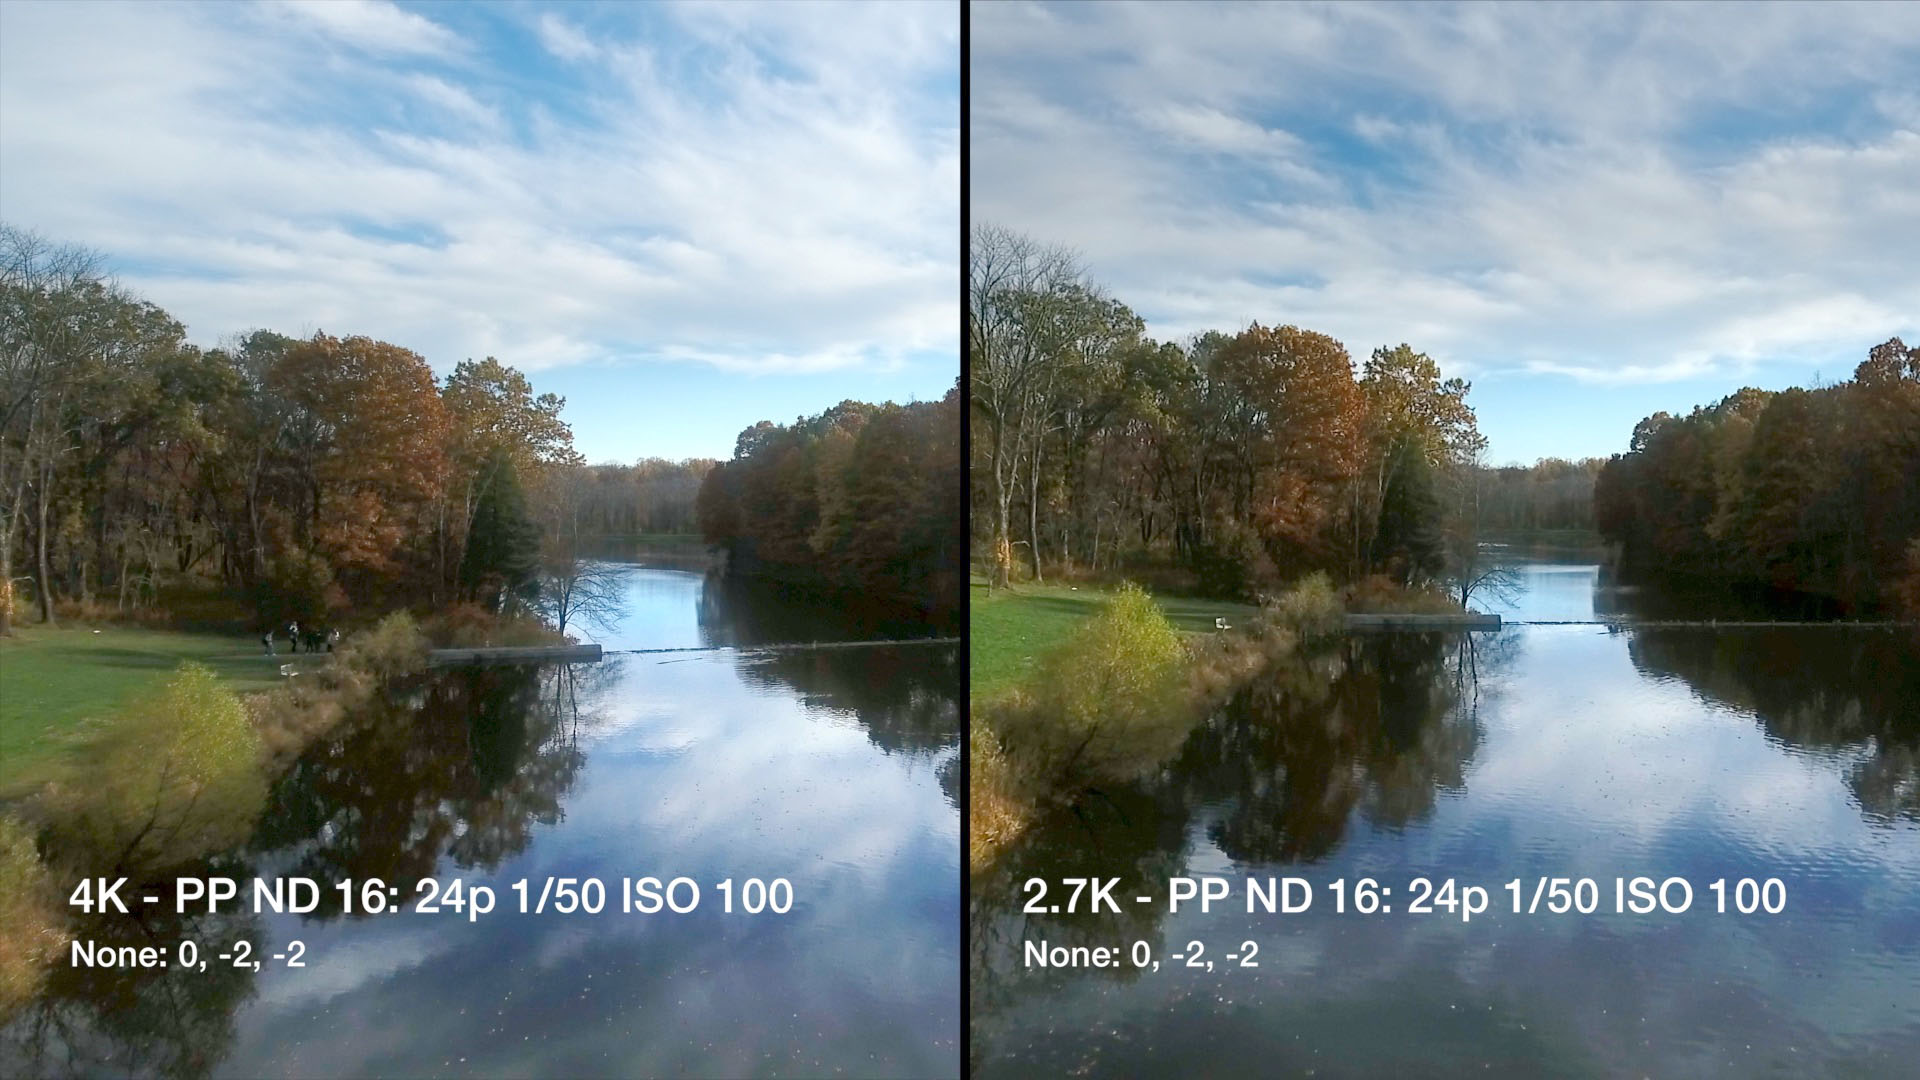 4K on the left, 2.7K on the right. Frame grab from 1080p timeline. 24p & 1/50 shutter (so some natural motion blur.) No additional sharpening in post. 2.7K is much more detailed.